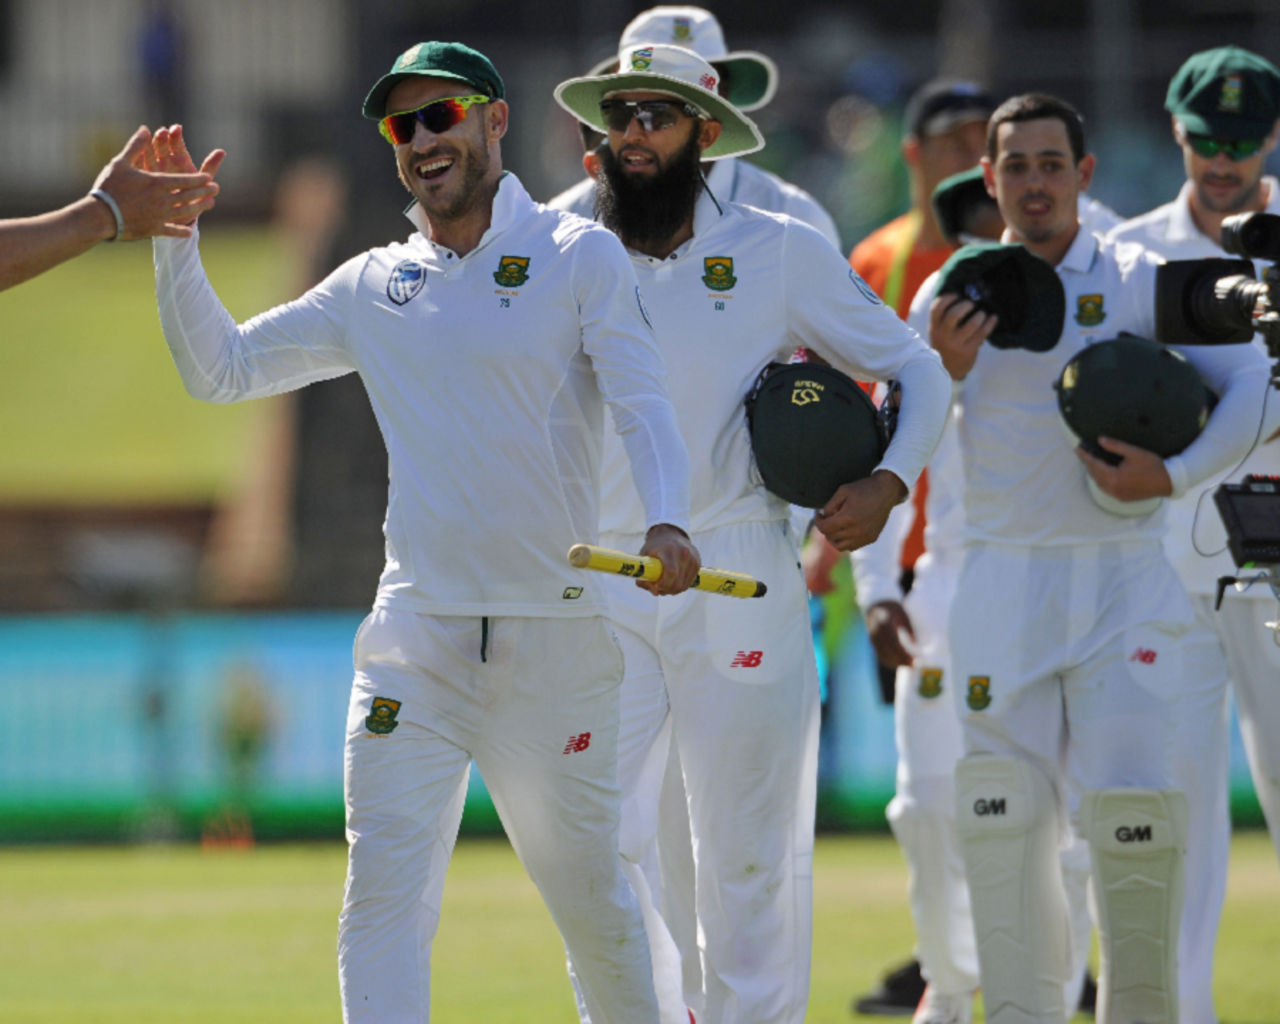 An ecstatic Faf du Plessis leads his victorious team off the field, Australia v South Africa, 1st Test, Perth, 5th day, November 7, 2016